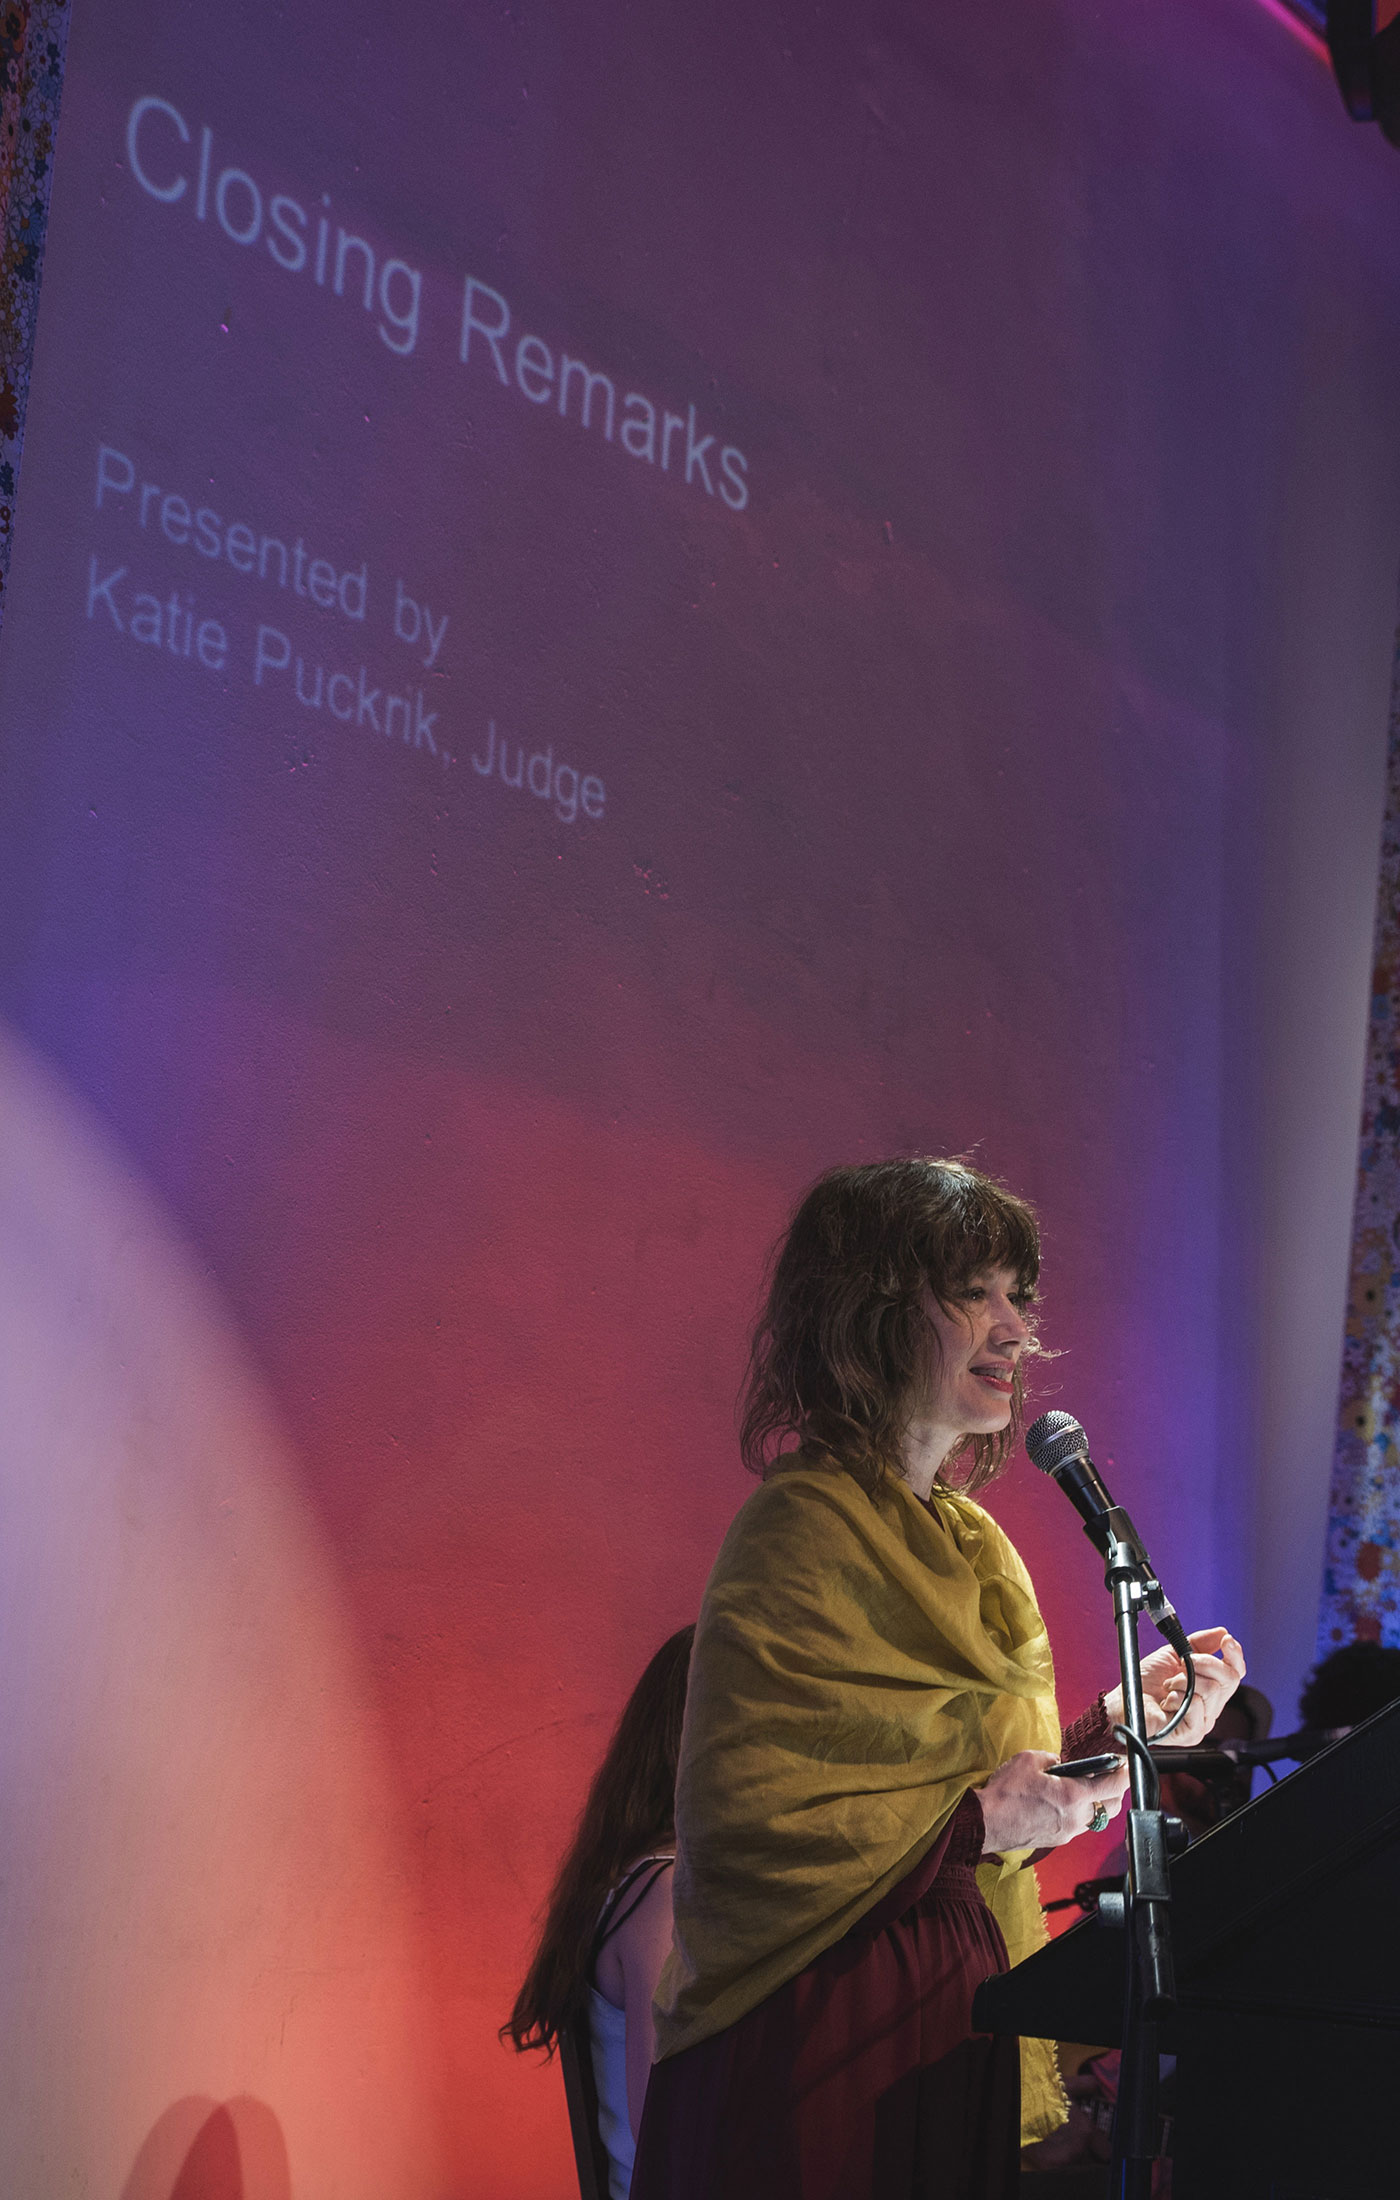 Katie Puckrik at The Art and Olfaction Awards, Photo by Marina Chichi